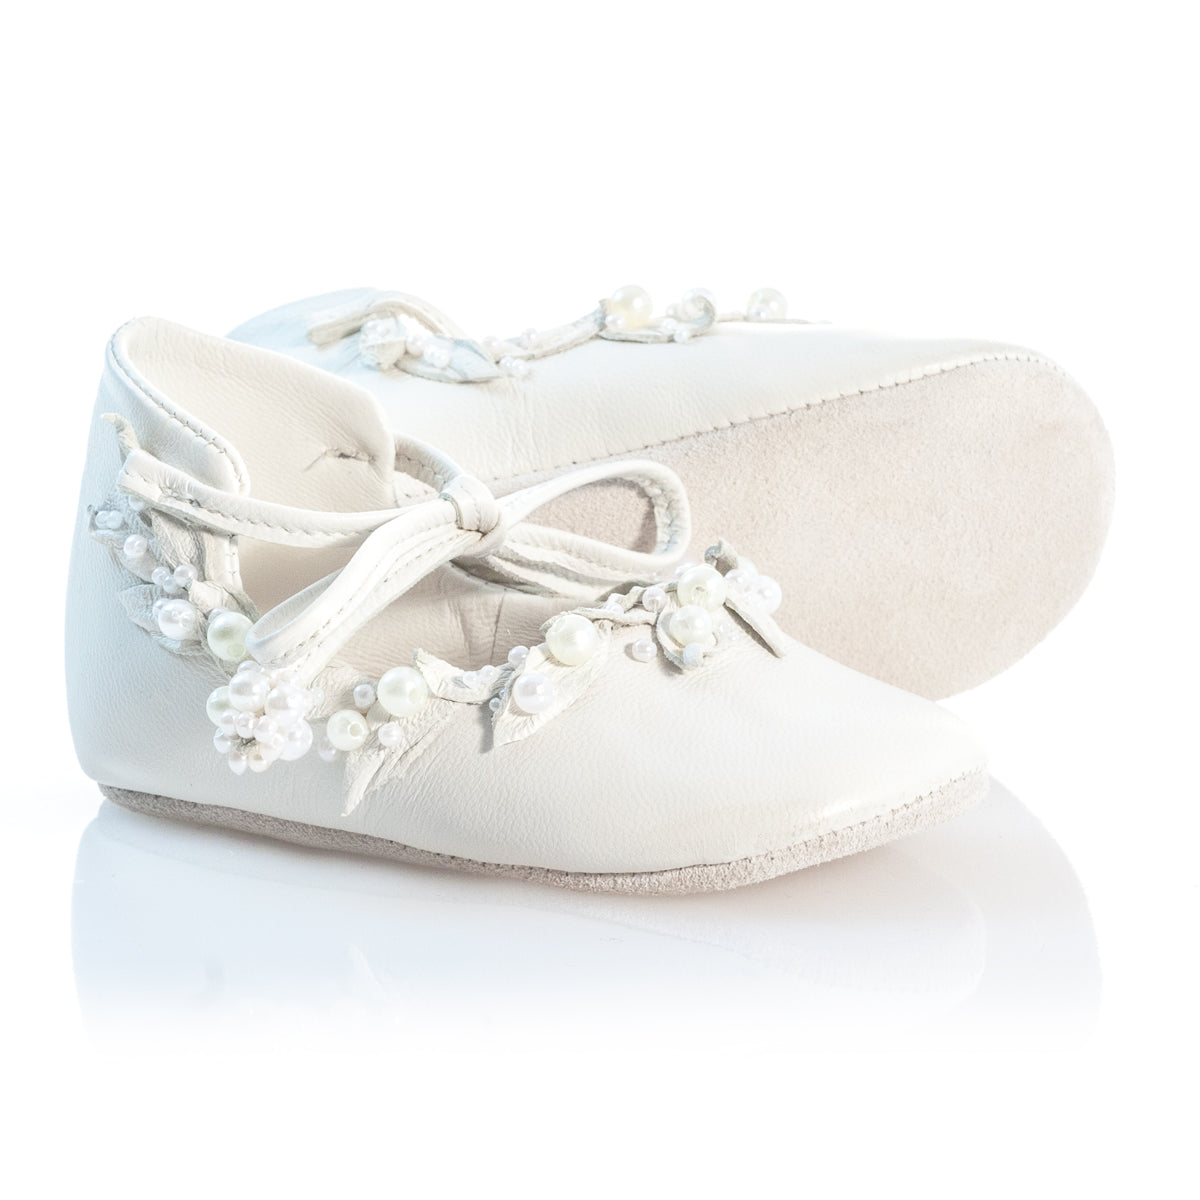 VIBYS WHITE FOREST handmade white leather baby shoes with pearls and leather leaves